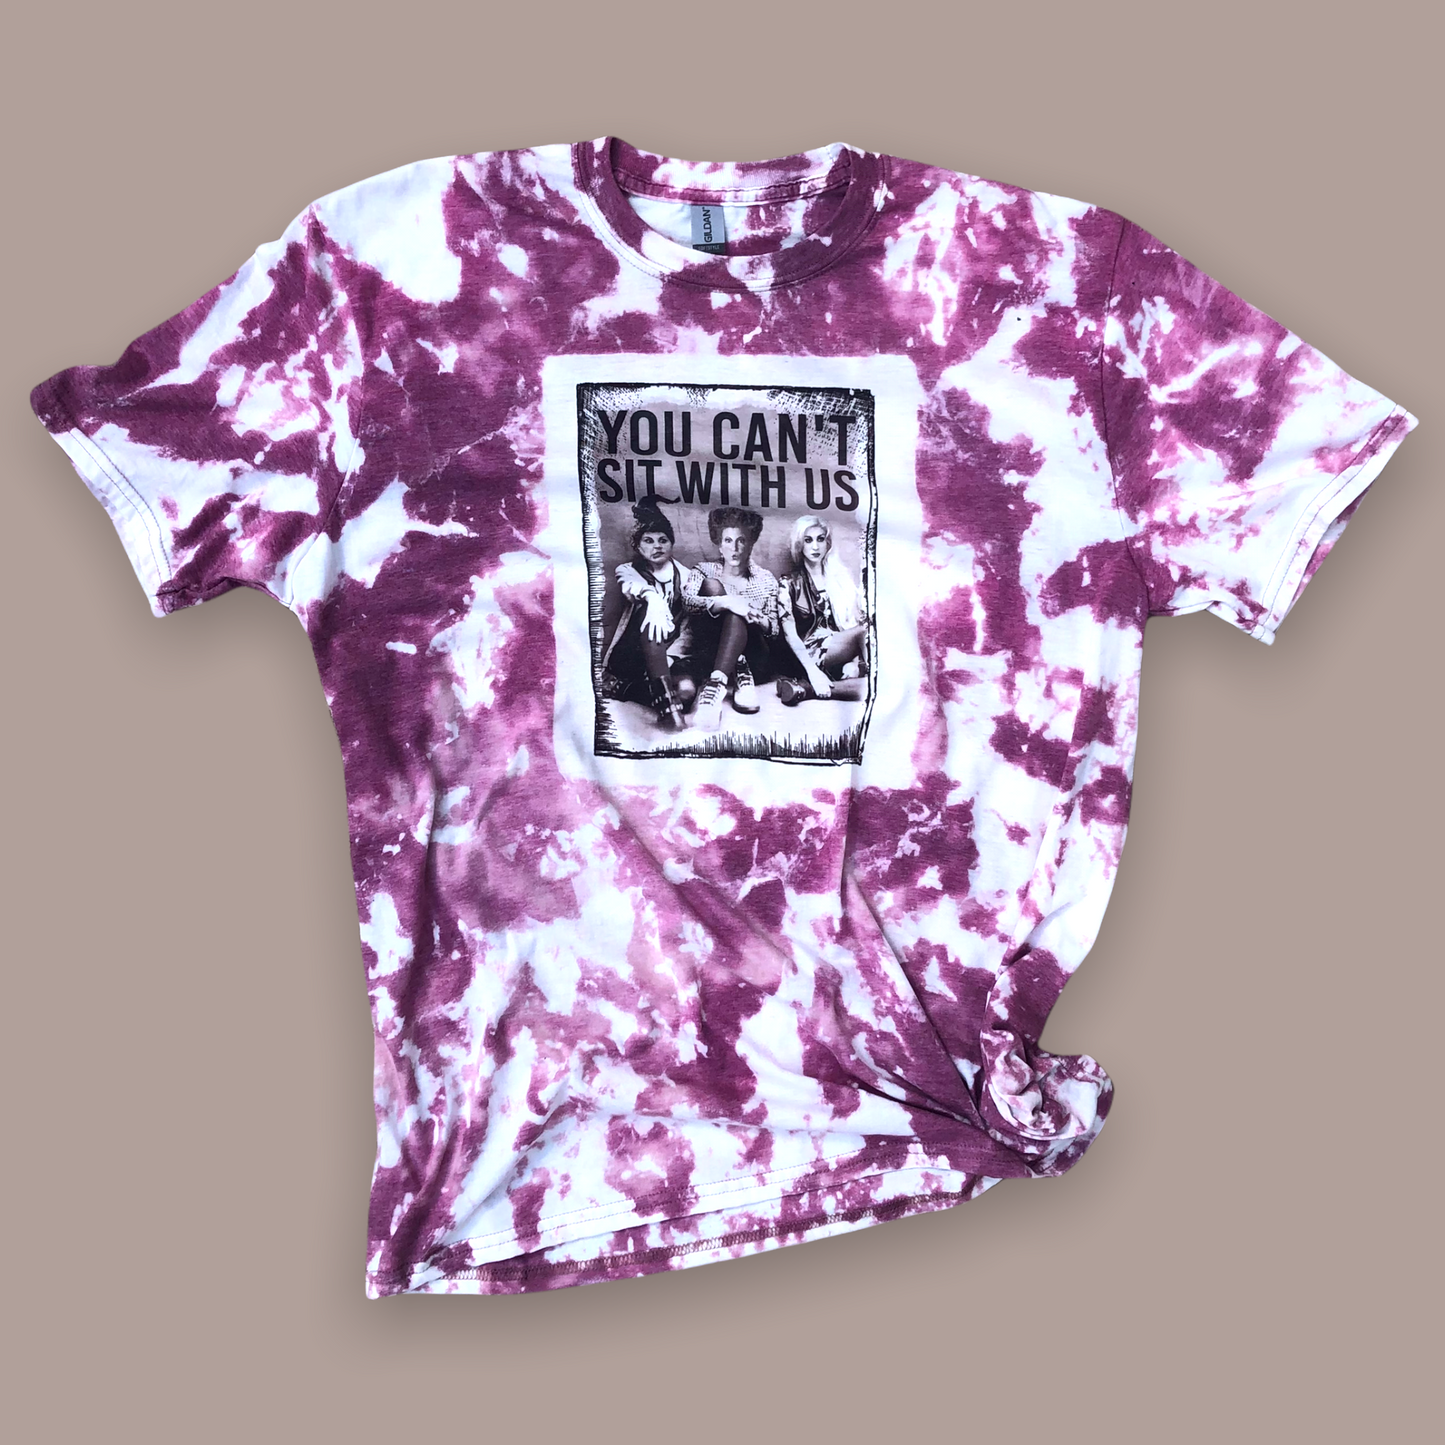 Hocus Pocus “You Can’t Sit With Us” Bleached Shirt